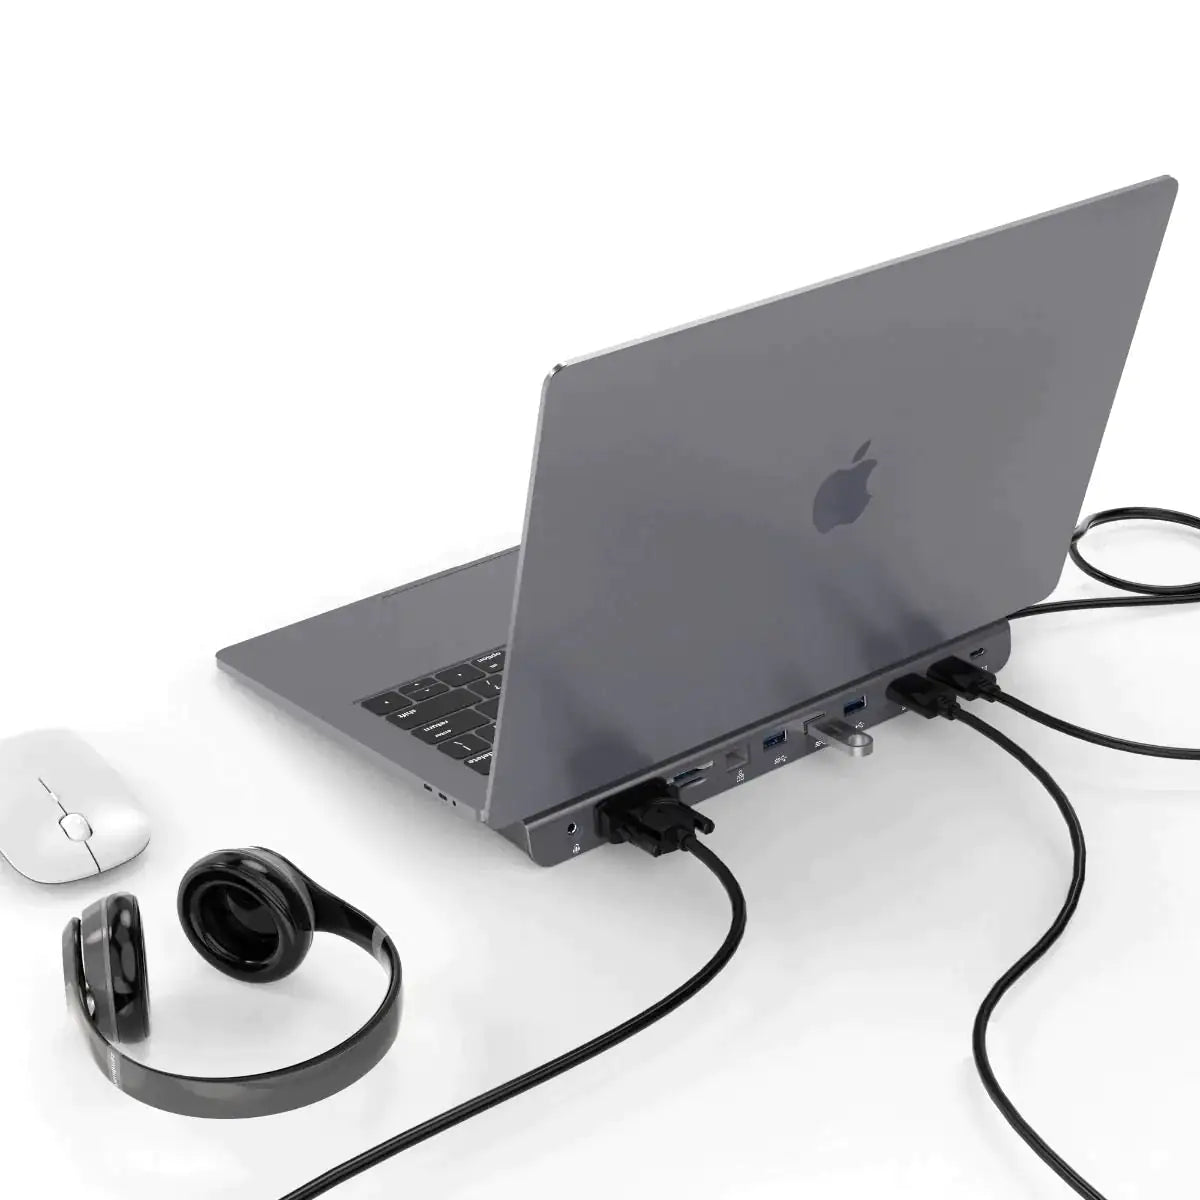 The Ultimate 11-Port Laptop Docking Station for a Clean and Efficient Workspace"